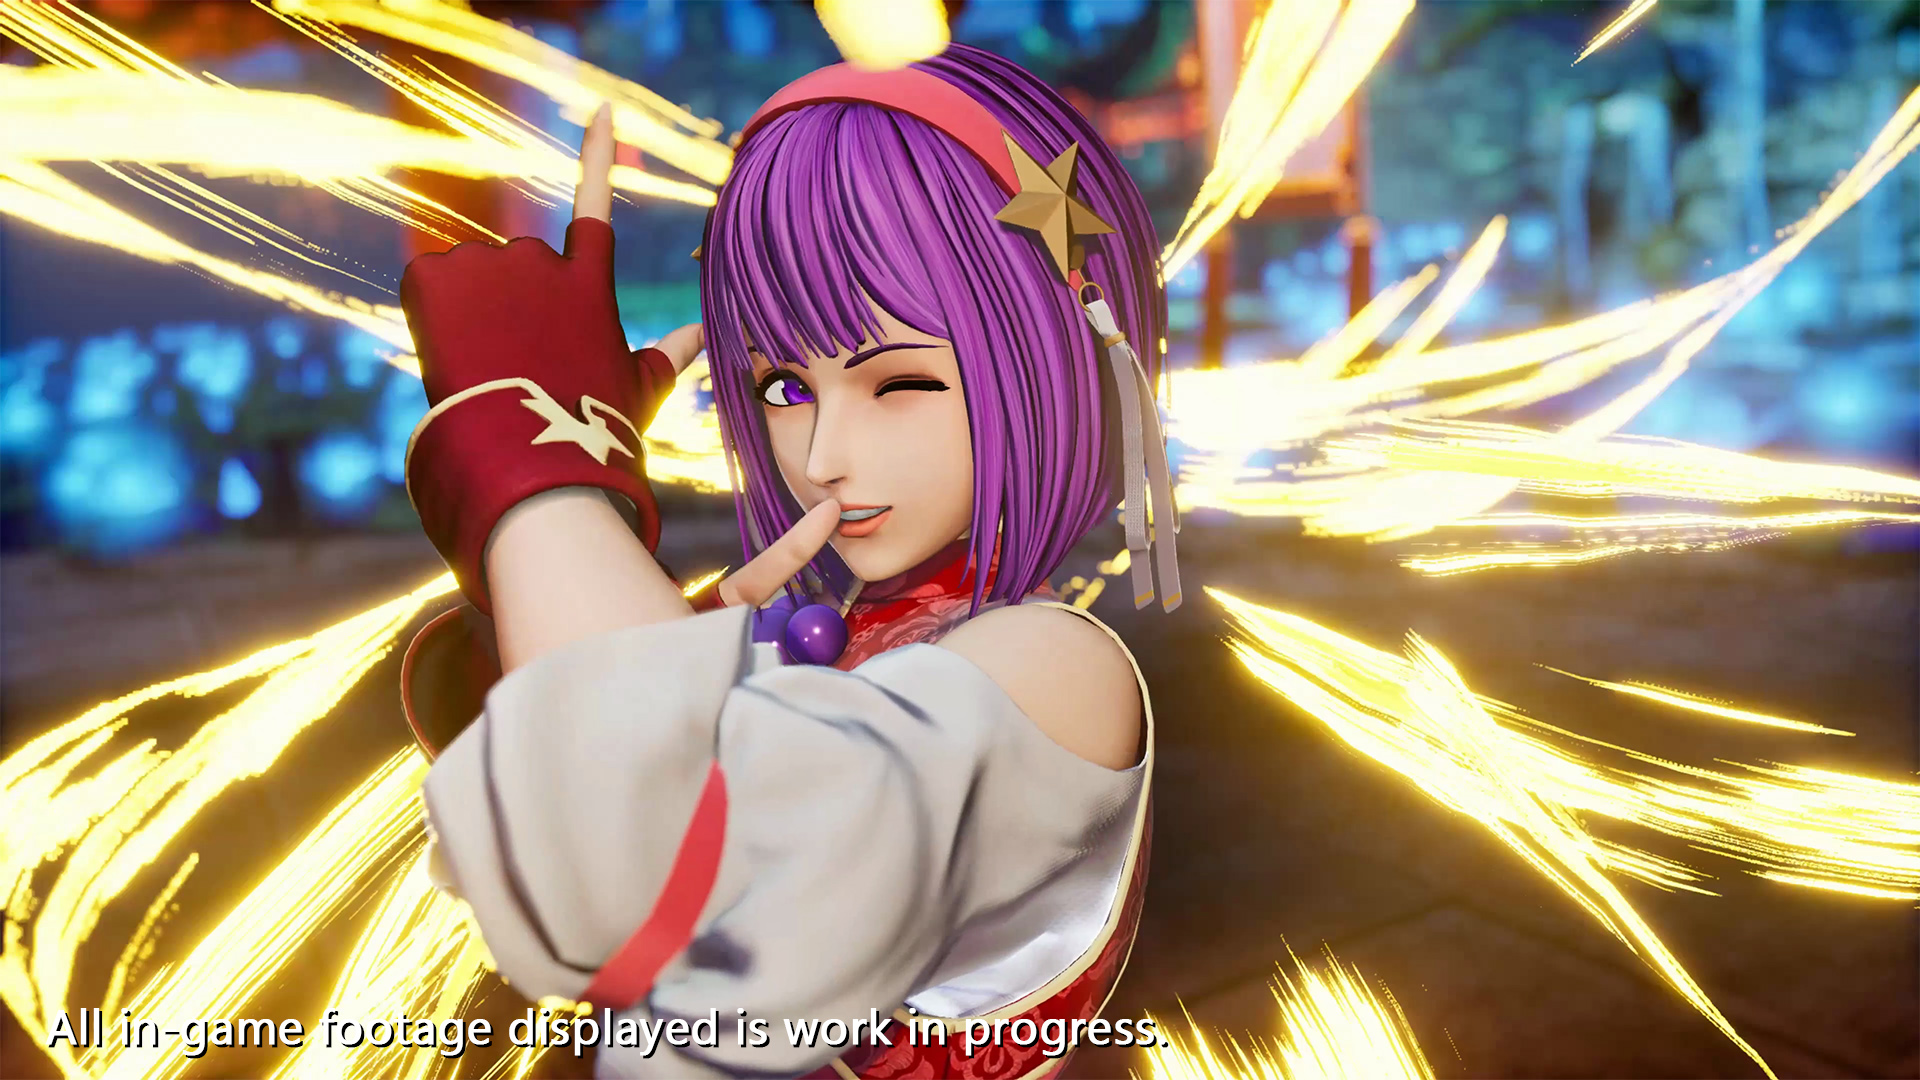 Crunchyroll - Athena Brings Her Psychic Powers to The King of Fighters XV